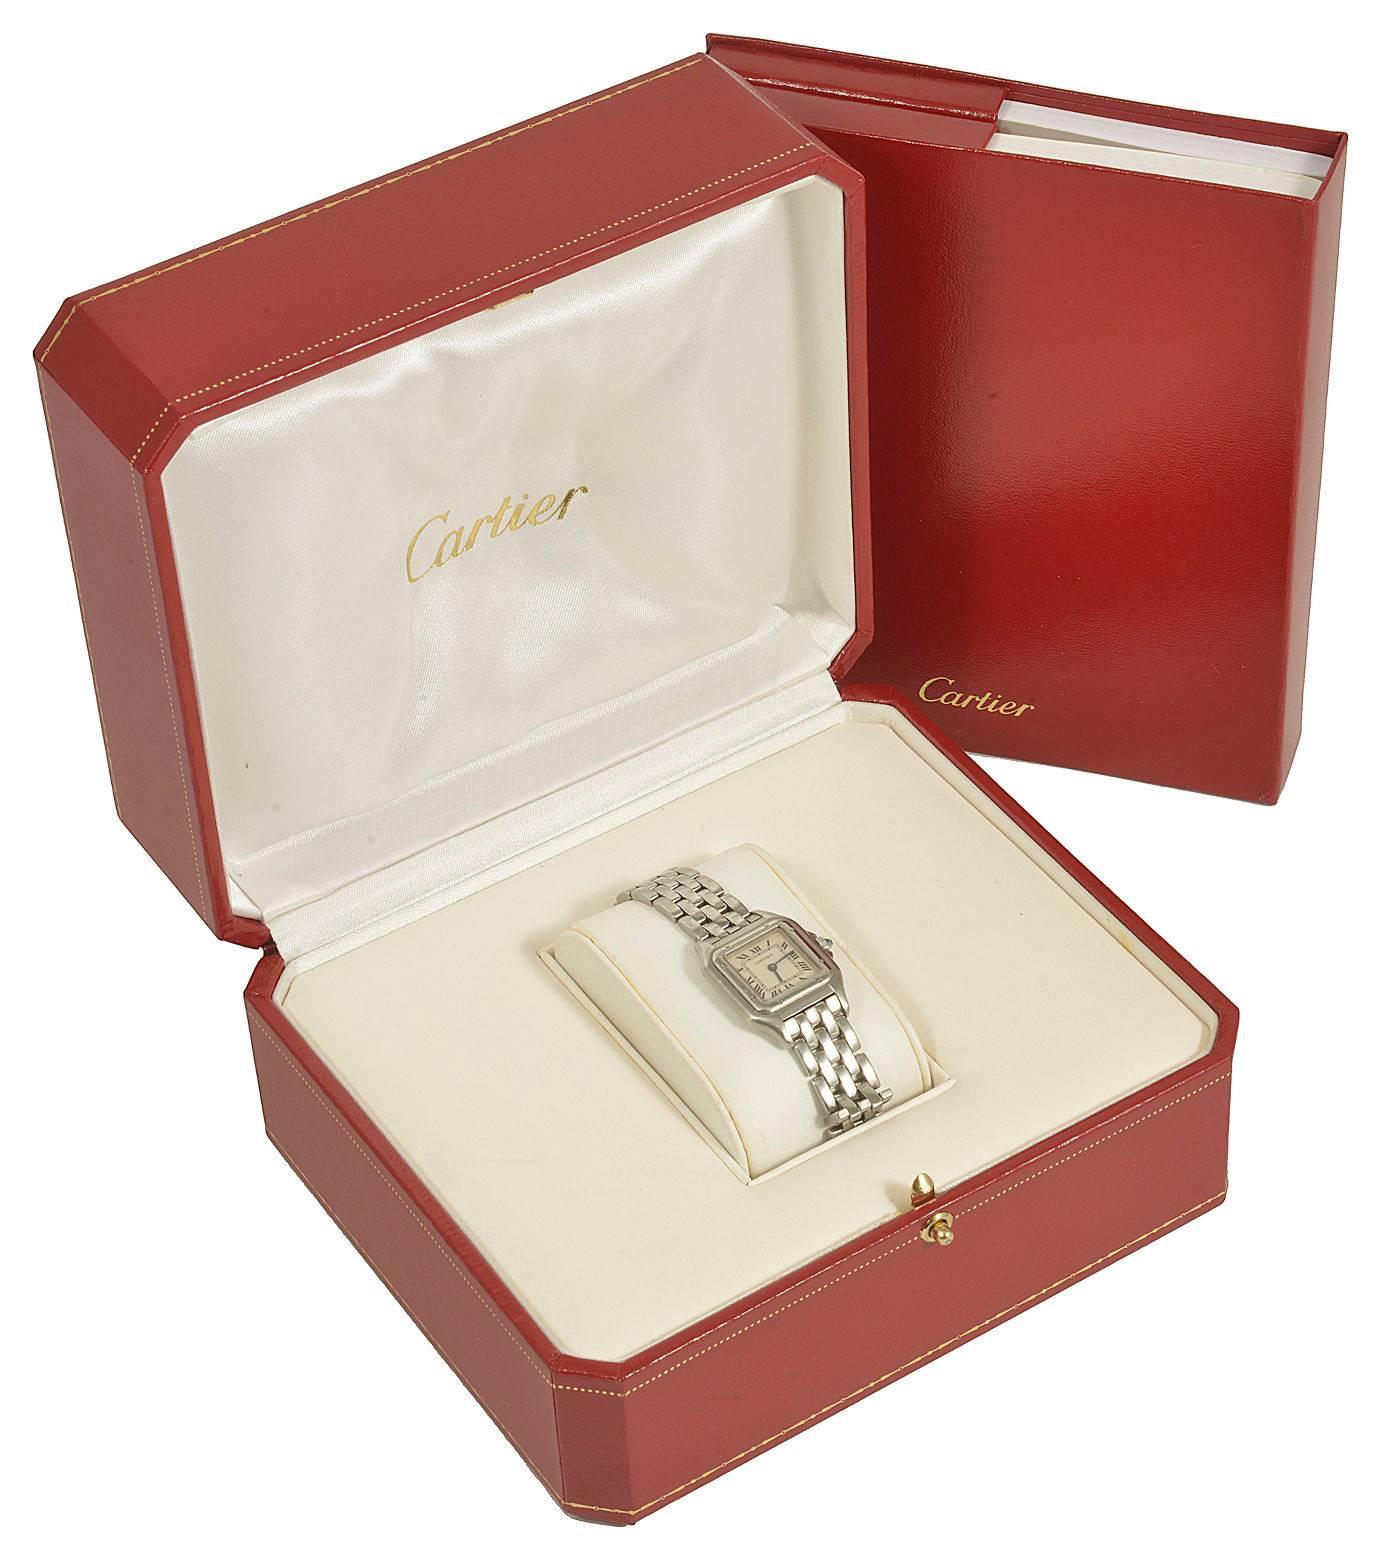 The square white dial with roman numerals, Cartier monogram in centre with bracelet and clasp, number on reverse 1320 601746UF, in fitted red Cartier box with instruction booklet and certificate booklet stamped I.C.O.S.
Tenerife Espana